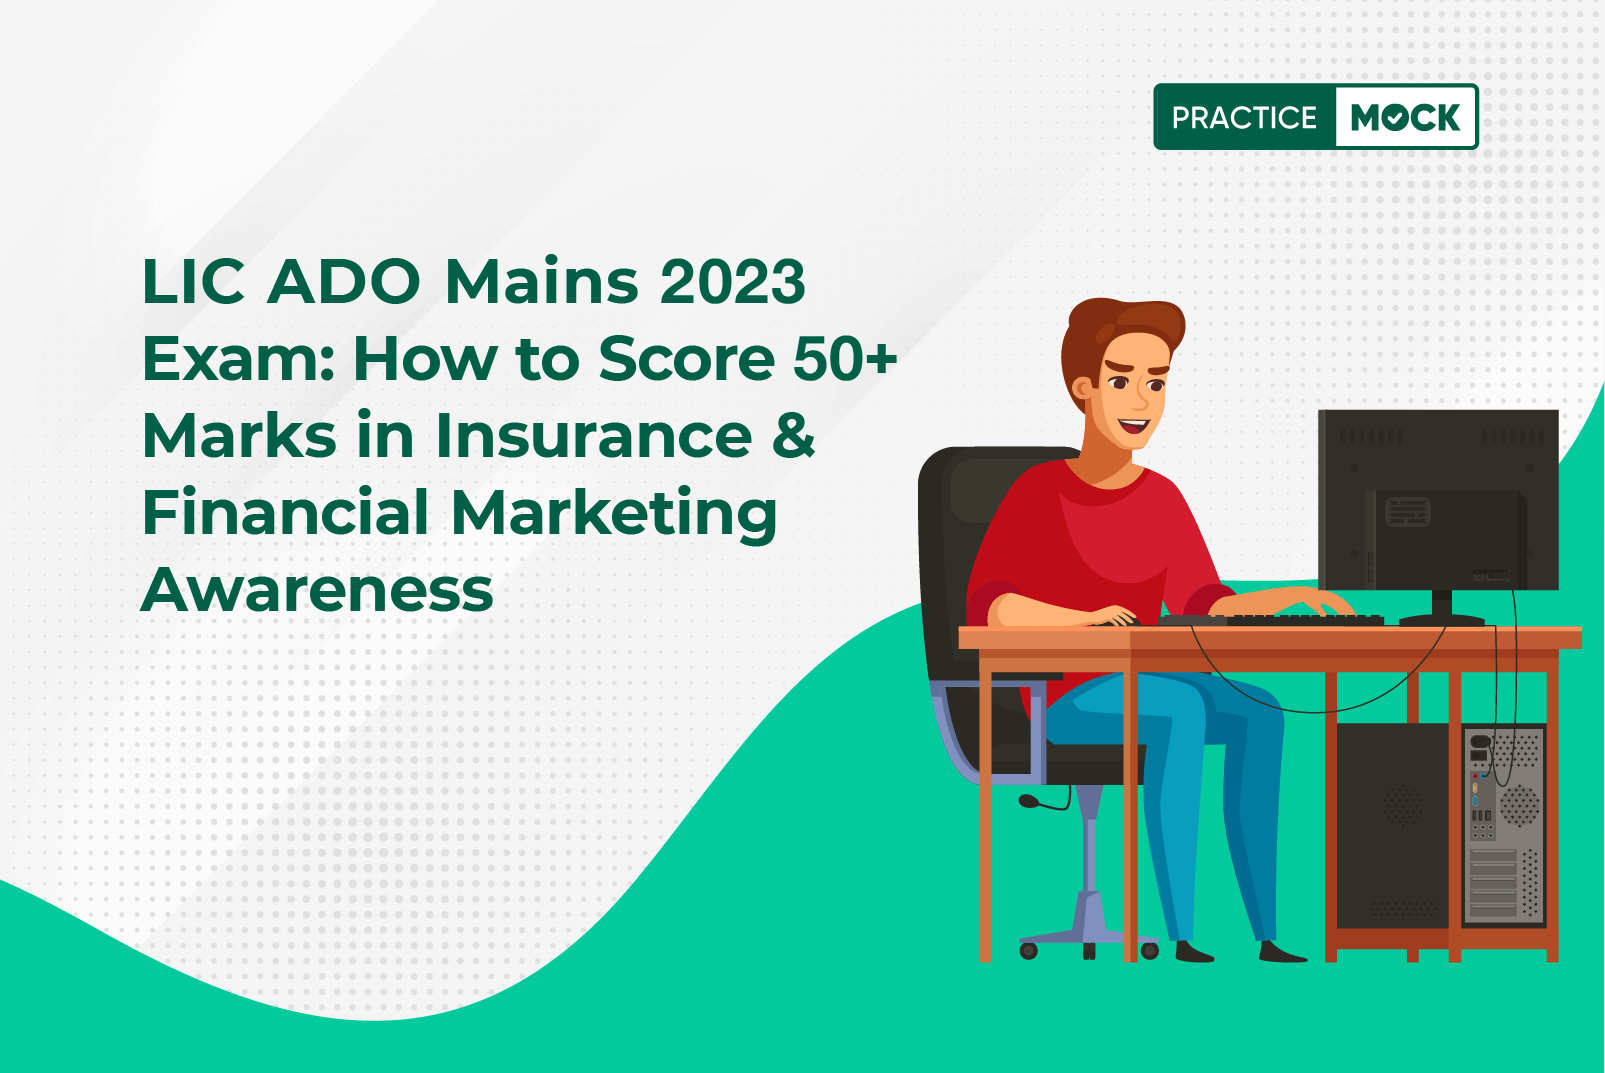 LIC ADO Mains 2023 Exam-How to Score 50+ Marks in Insurance and Financial Marketing Awareness